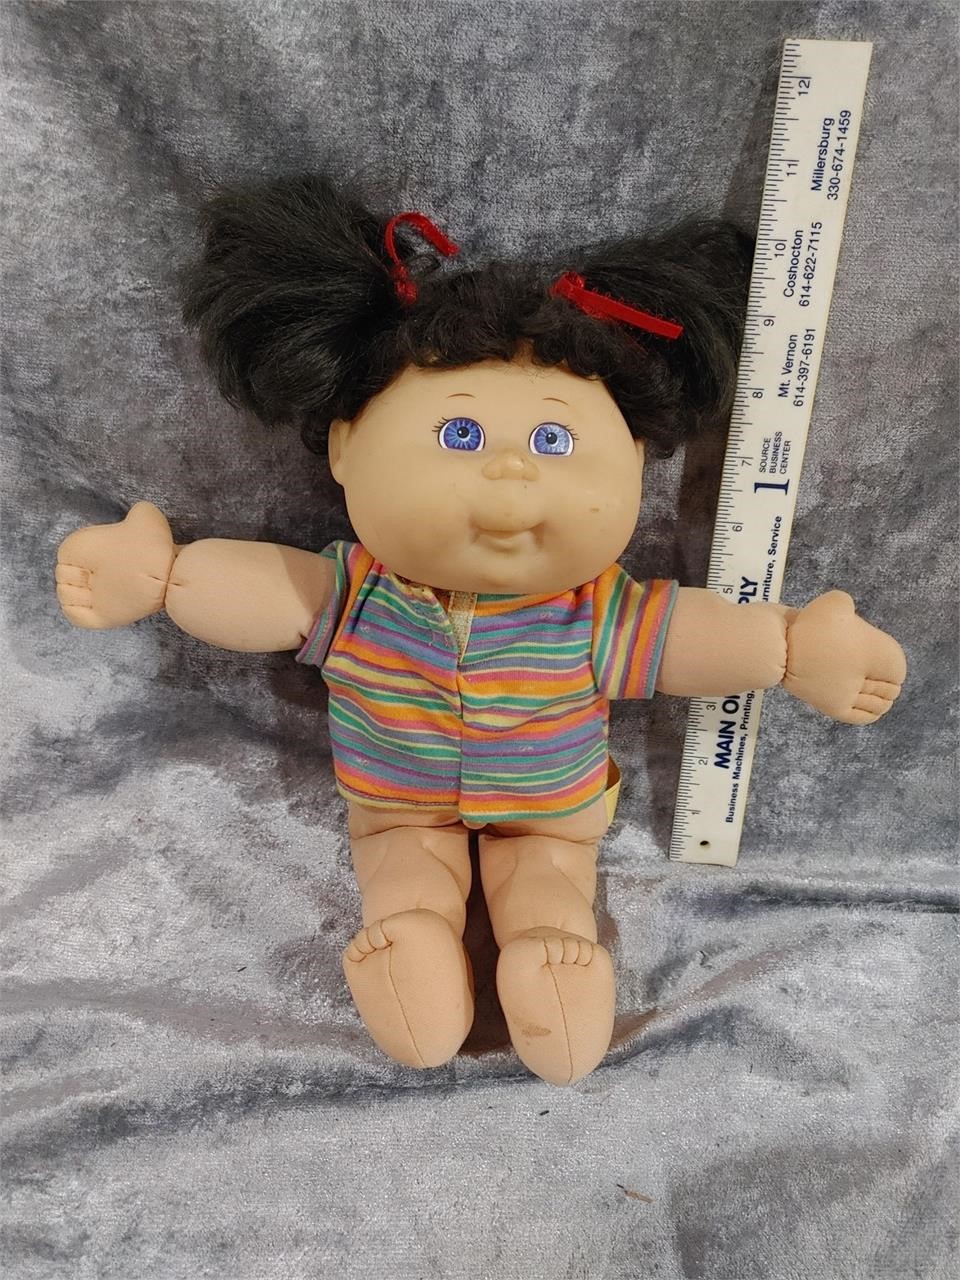 CLUTTER BUSTER Auction- Vintage Dolls, Glassware, pictures